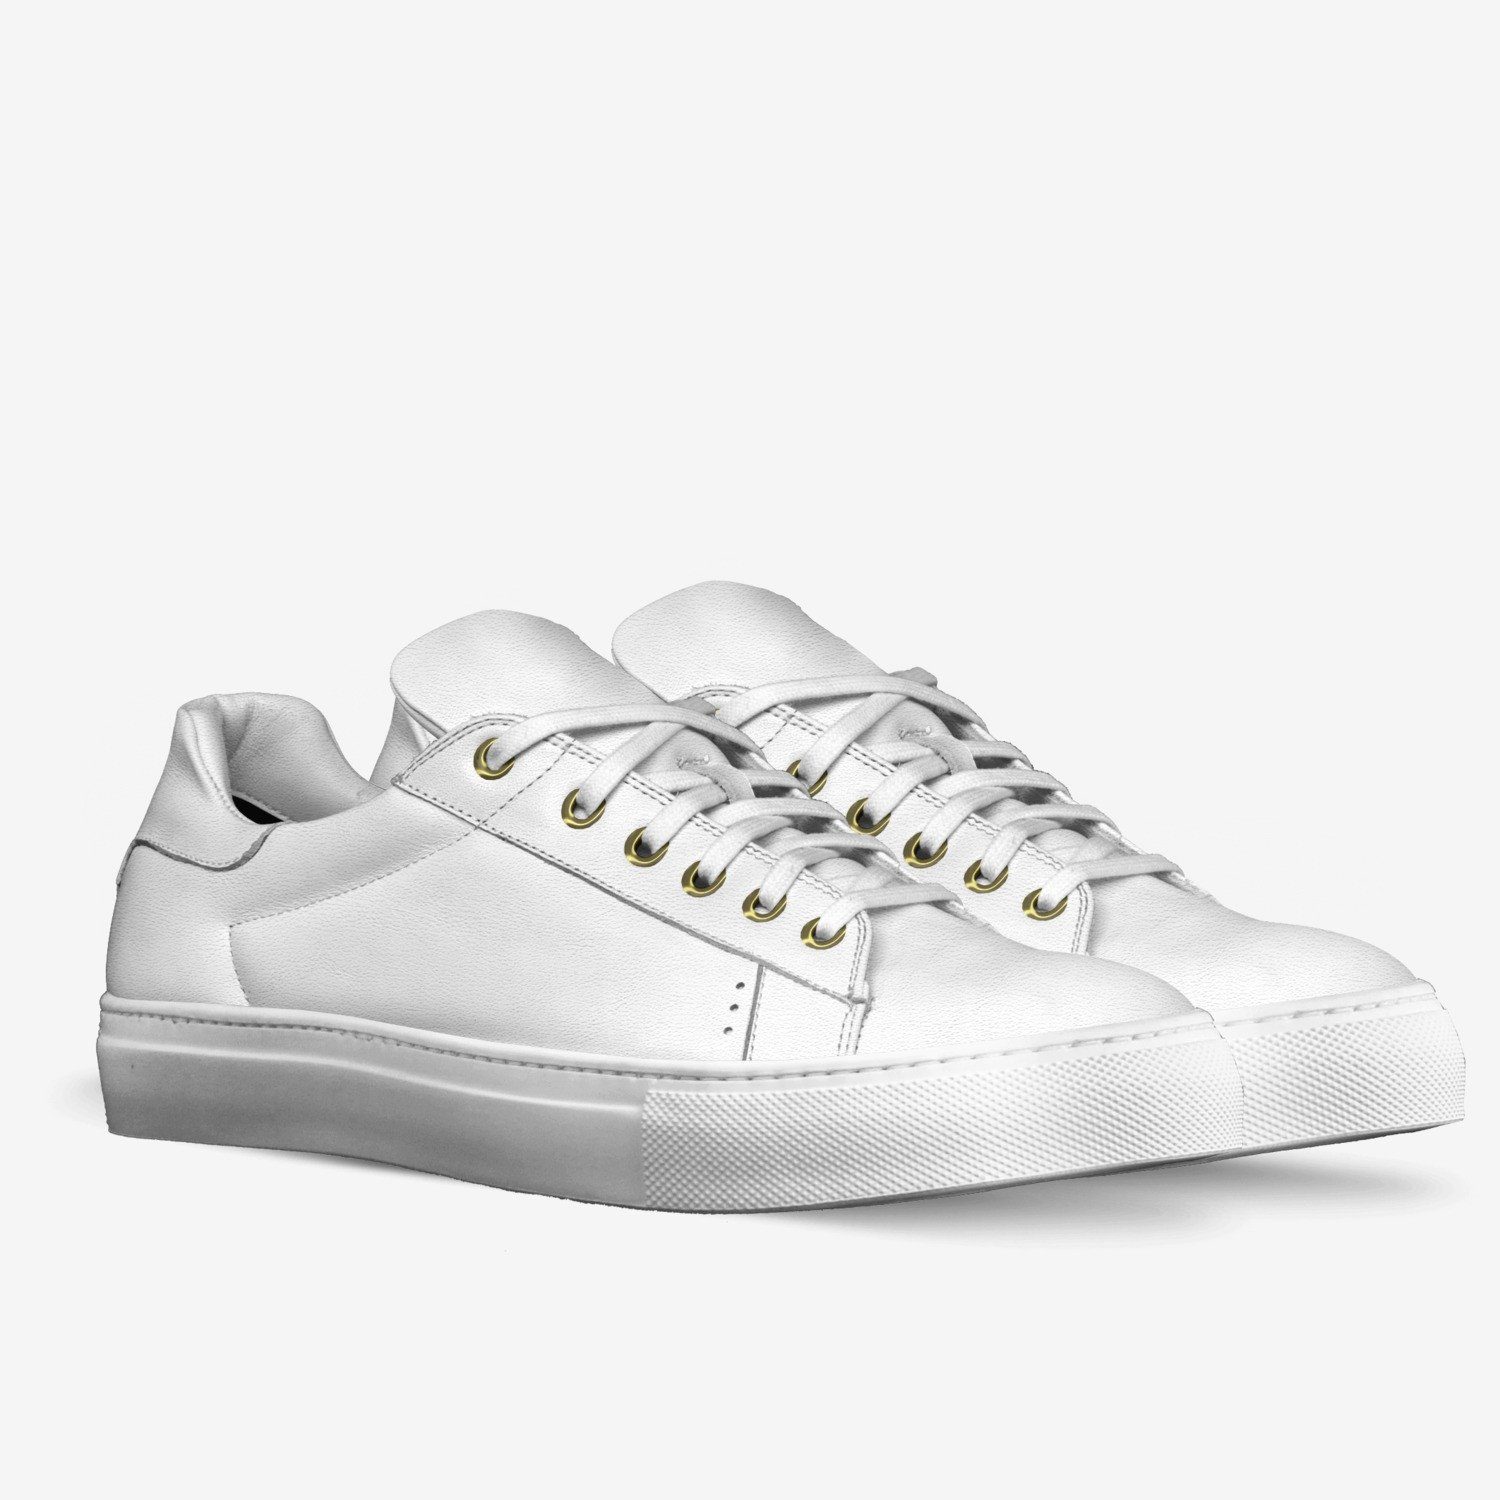 LORENZO LEATHER SNEAKERS IN MILK WHITE | Poor Little Rich Boy Clothing